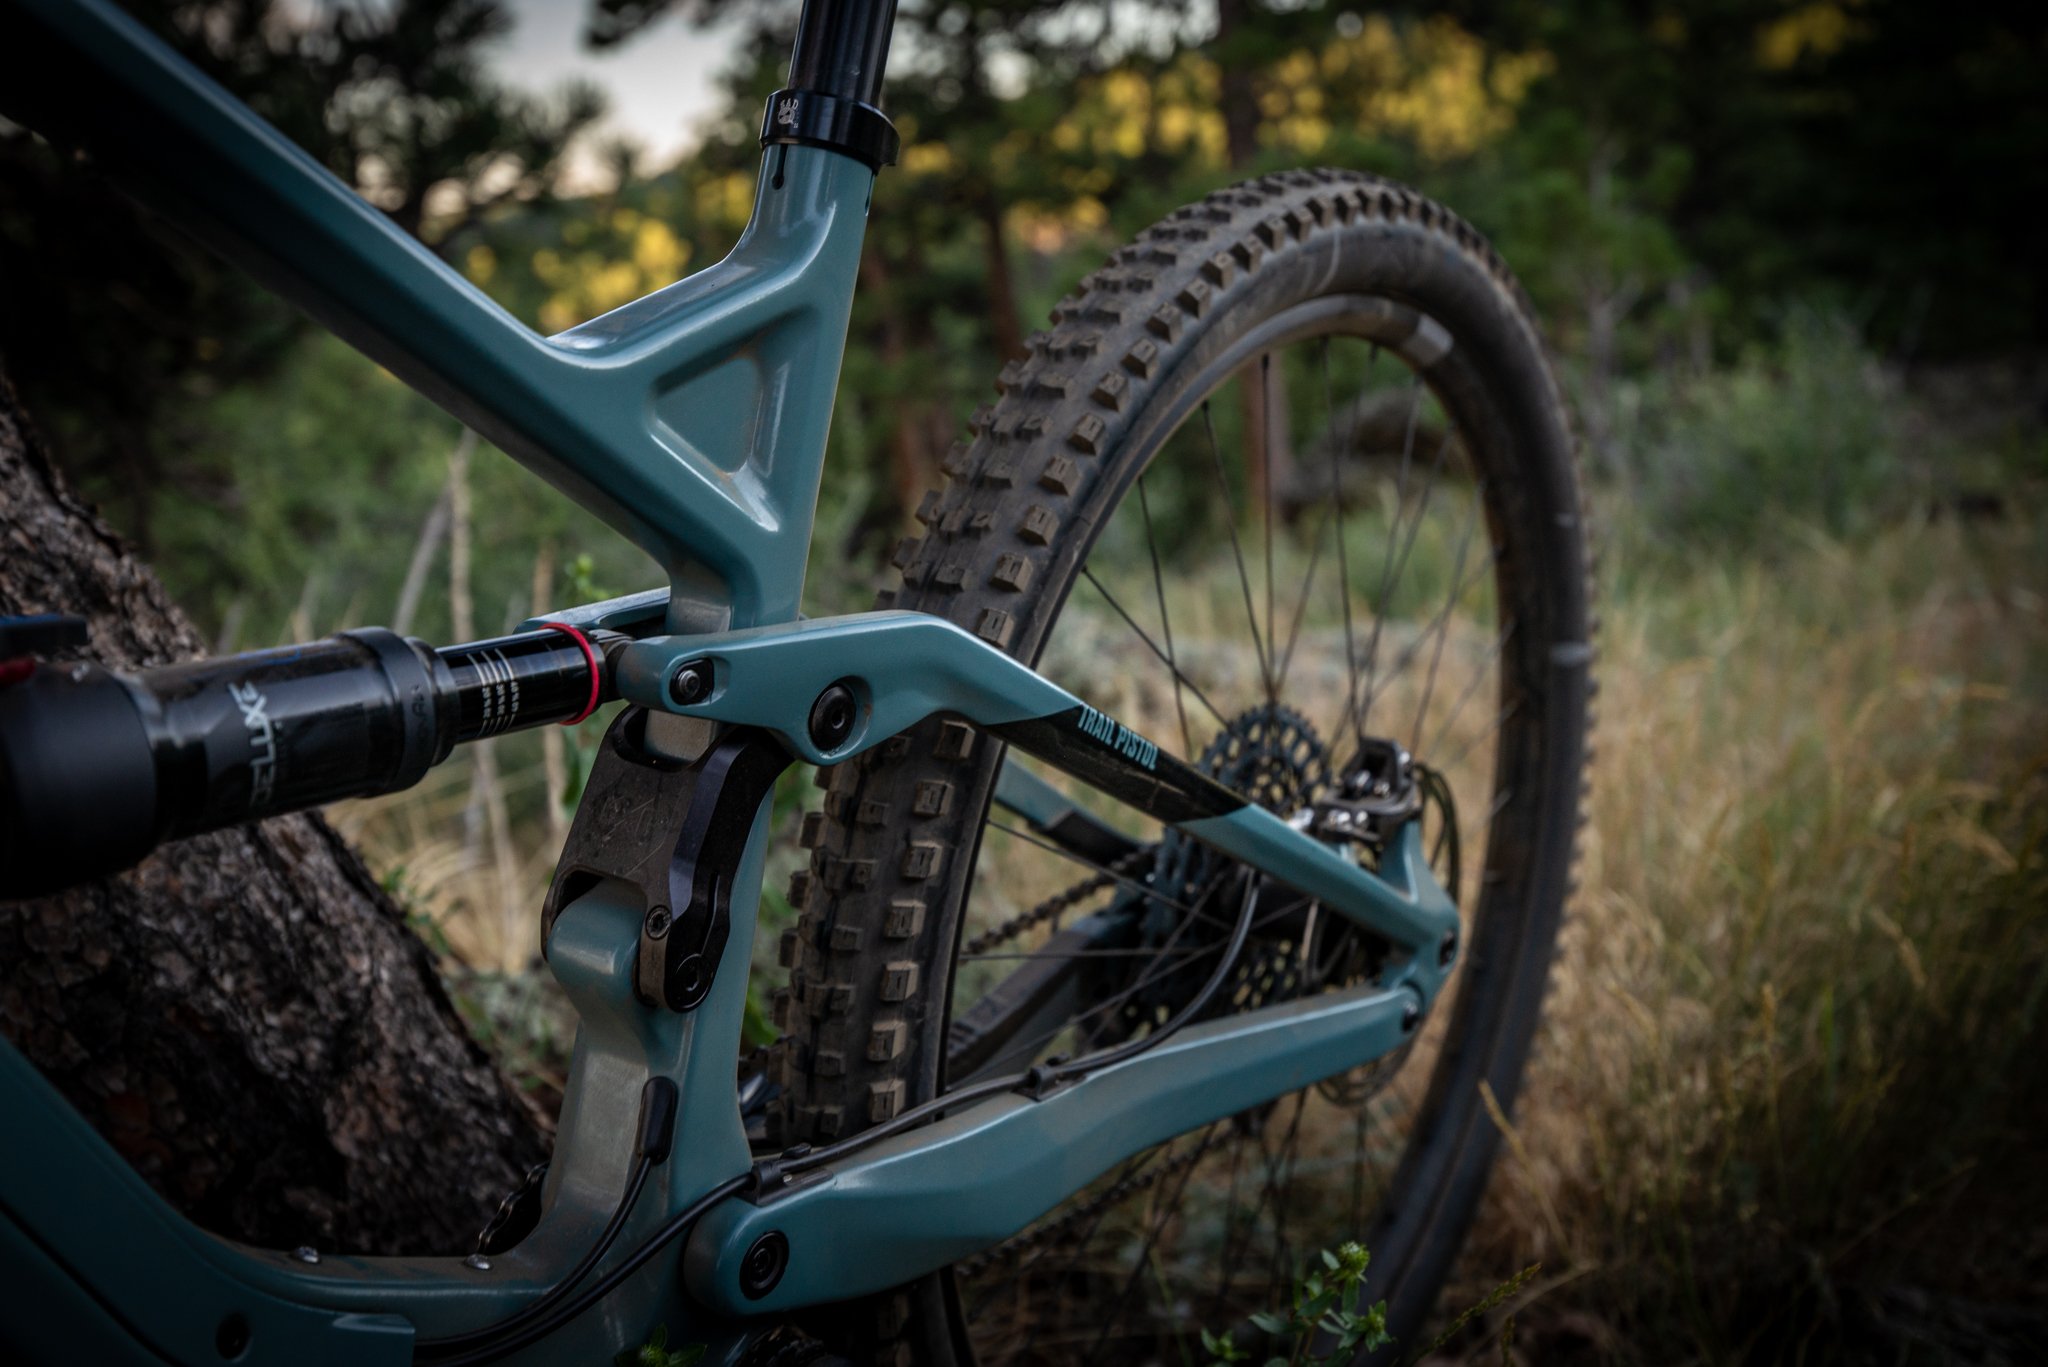 The Guerilla Gravity Trail Pistol now comes in this sweet Stealth Blue colorway.